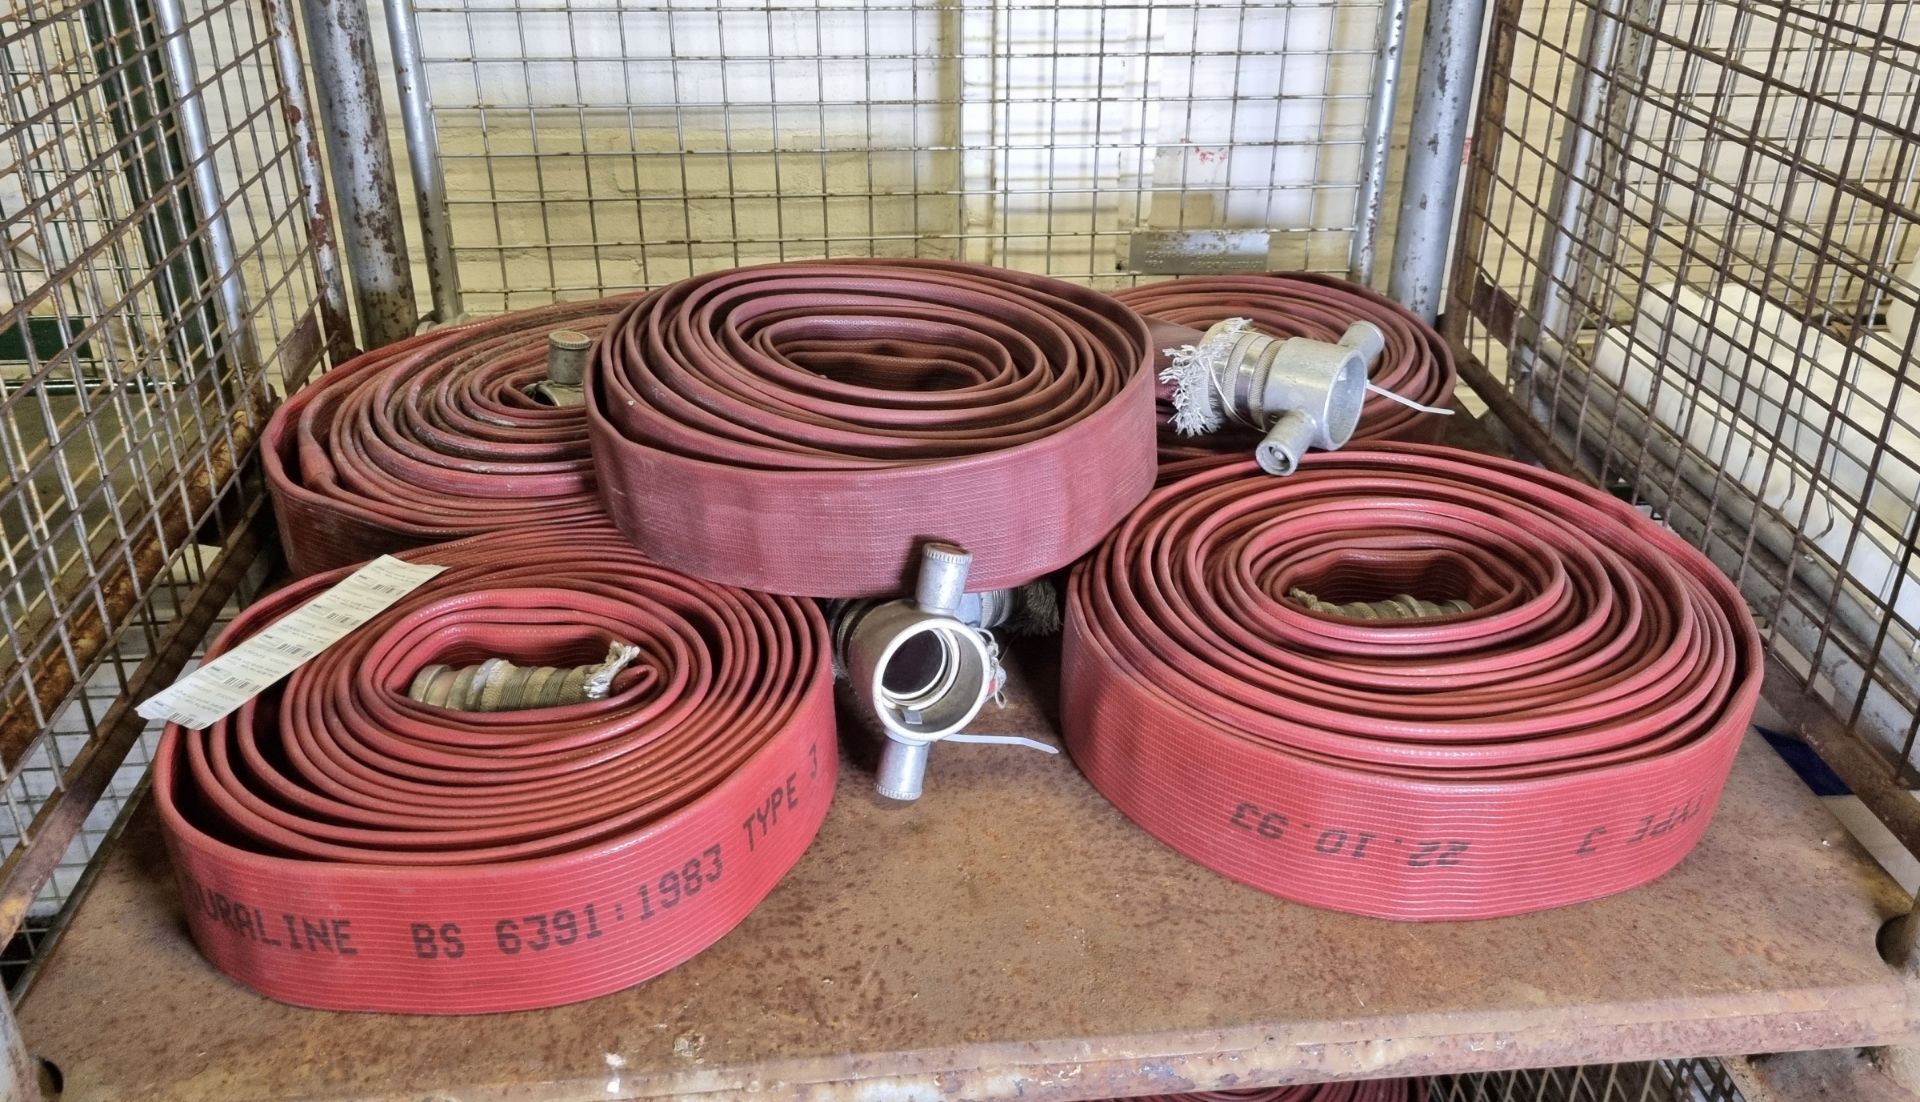 5x Red layflat fire hose - 70mm diameter, approx 20m length - Image 2 of 4